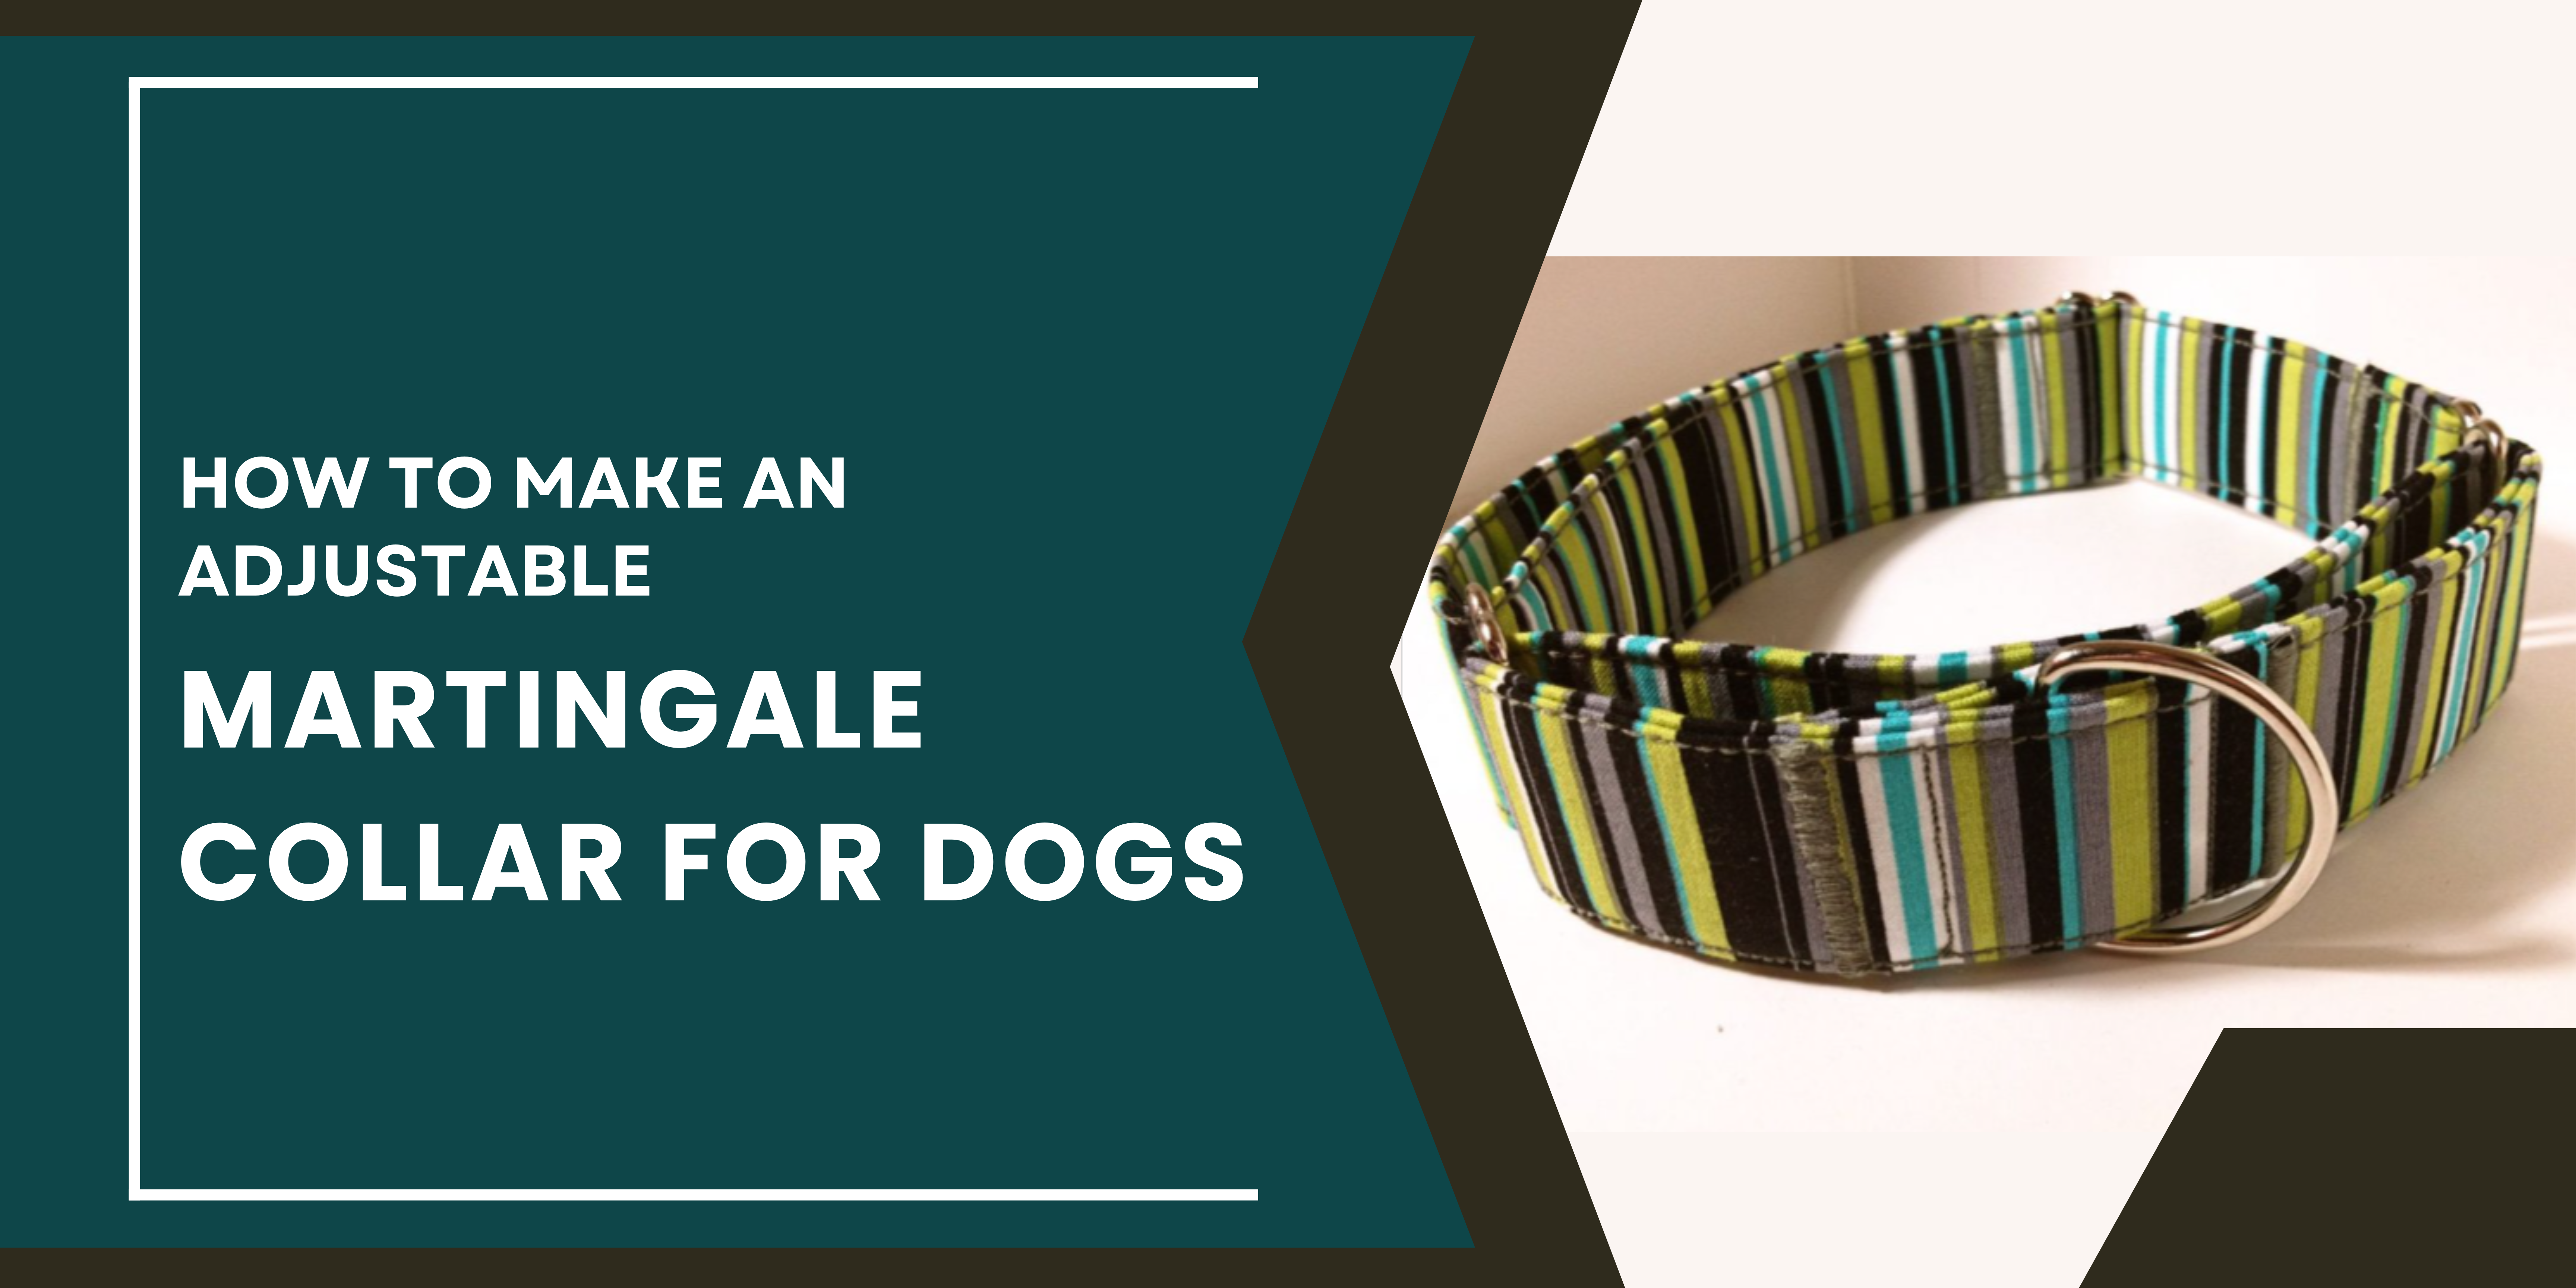 How to Make an Adjustable Martingale Collar for Dogs